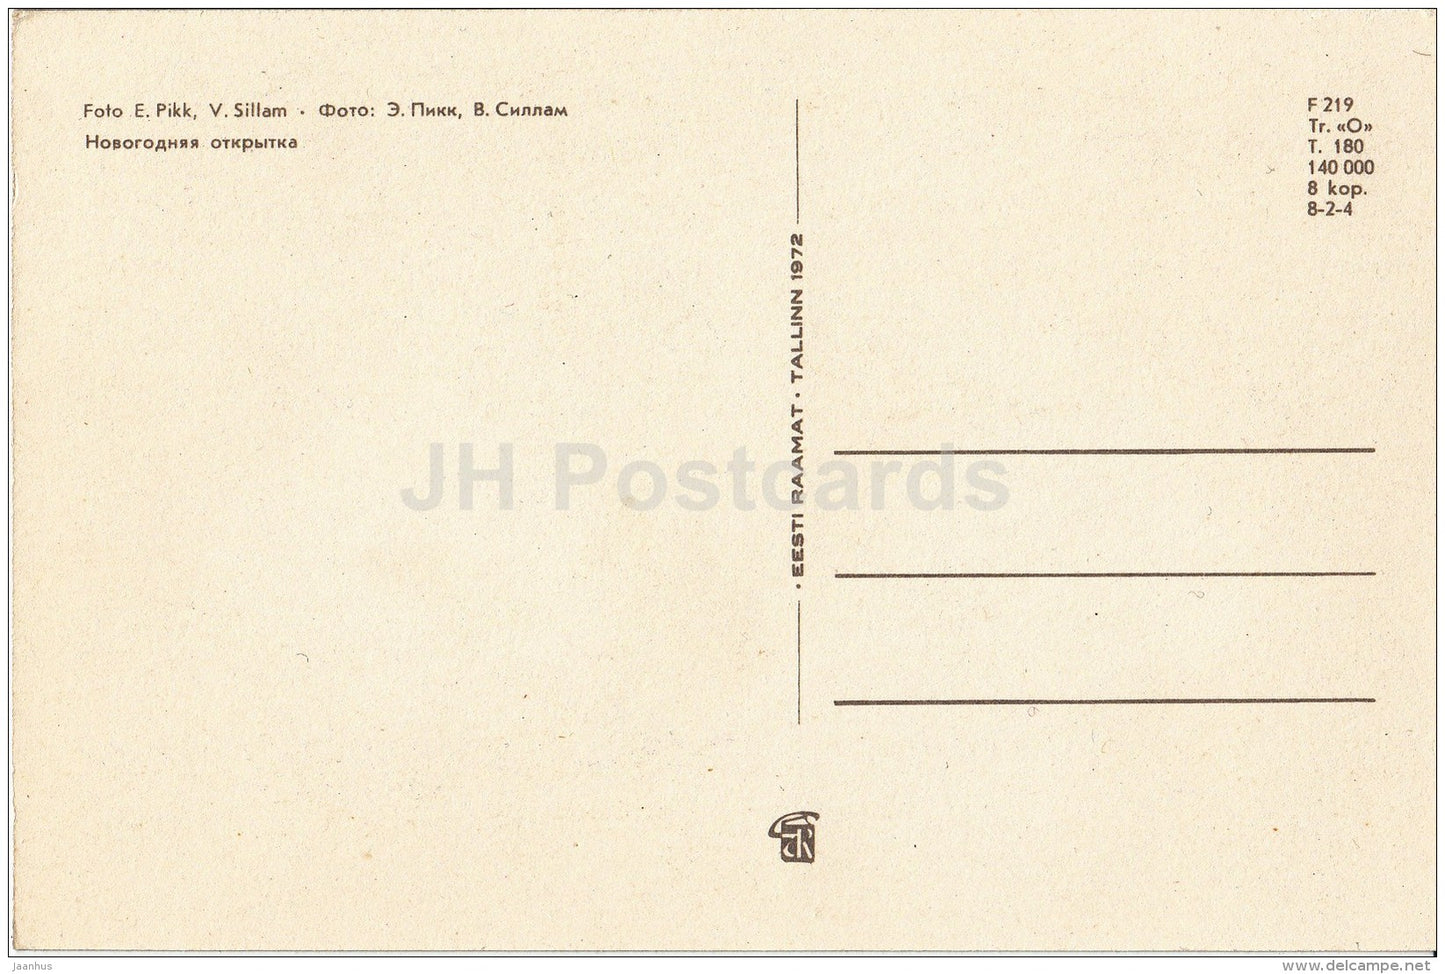 New Year Greeting card - 2 - clew - rods - doll in folk costumes - 1972 - Estonia USSR - unused - JH Postcards